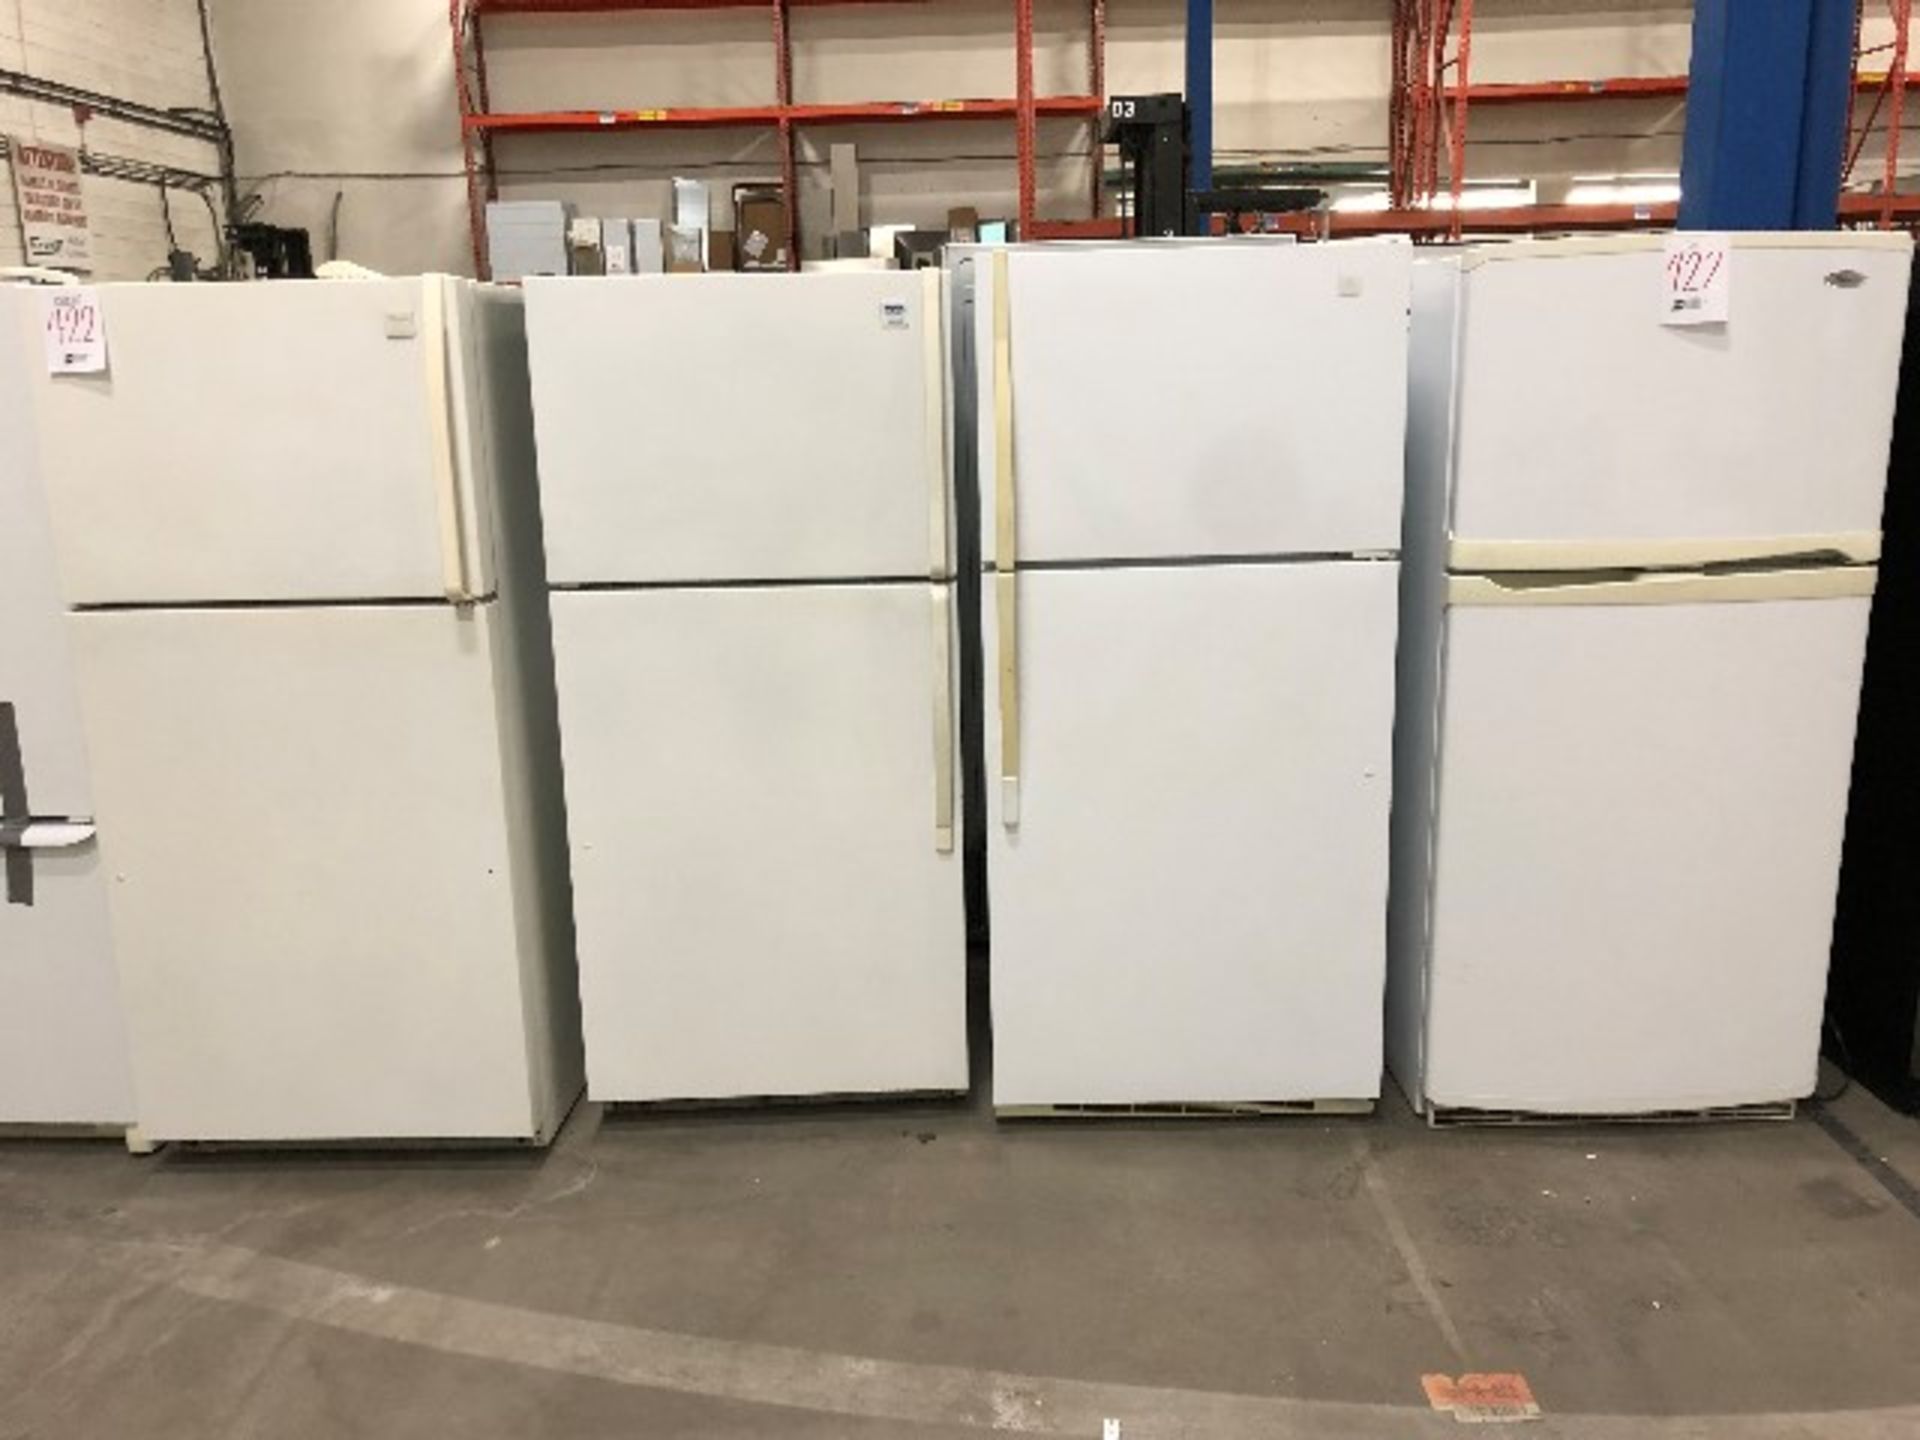 LOT: Assorted refrigerators, white, 4pcs “NON TESTED” (for parts only)